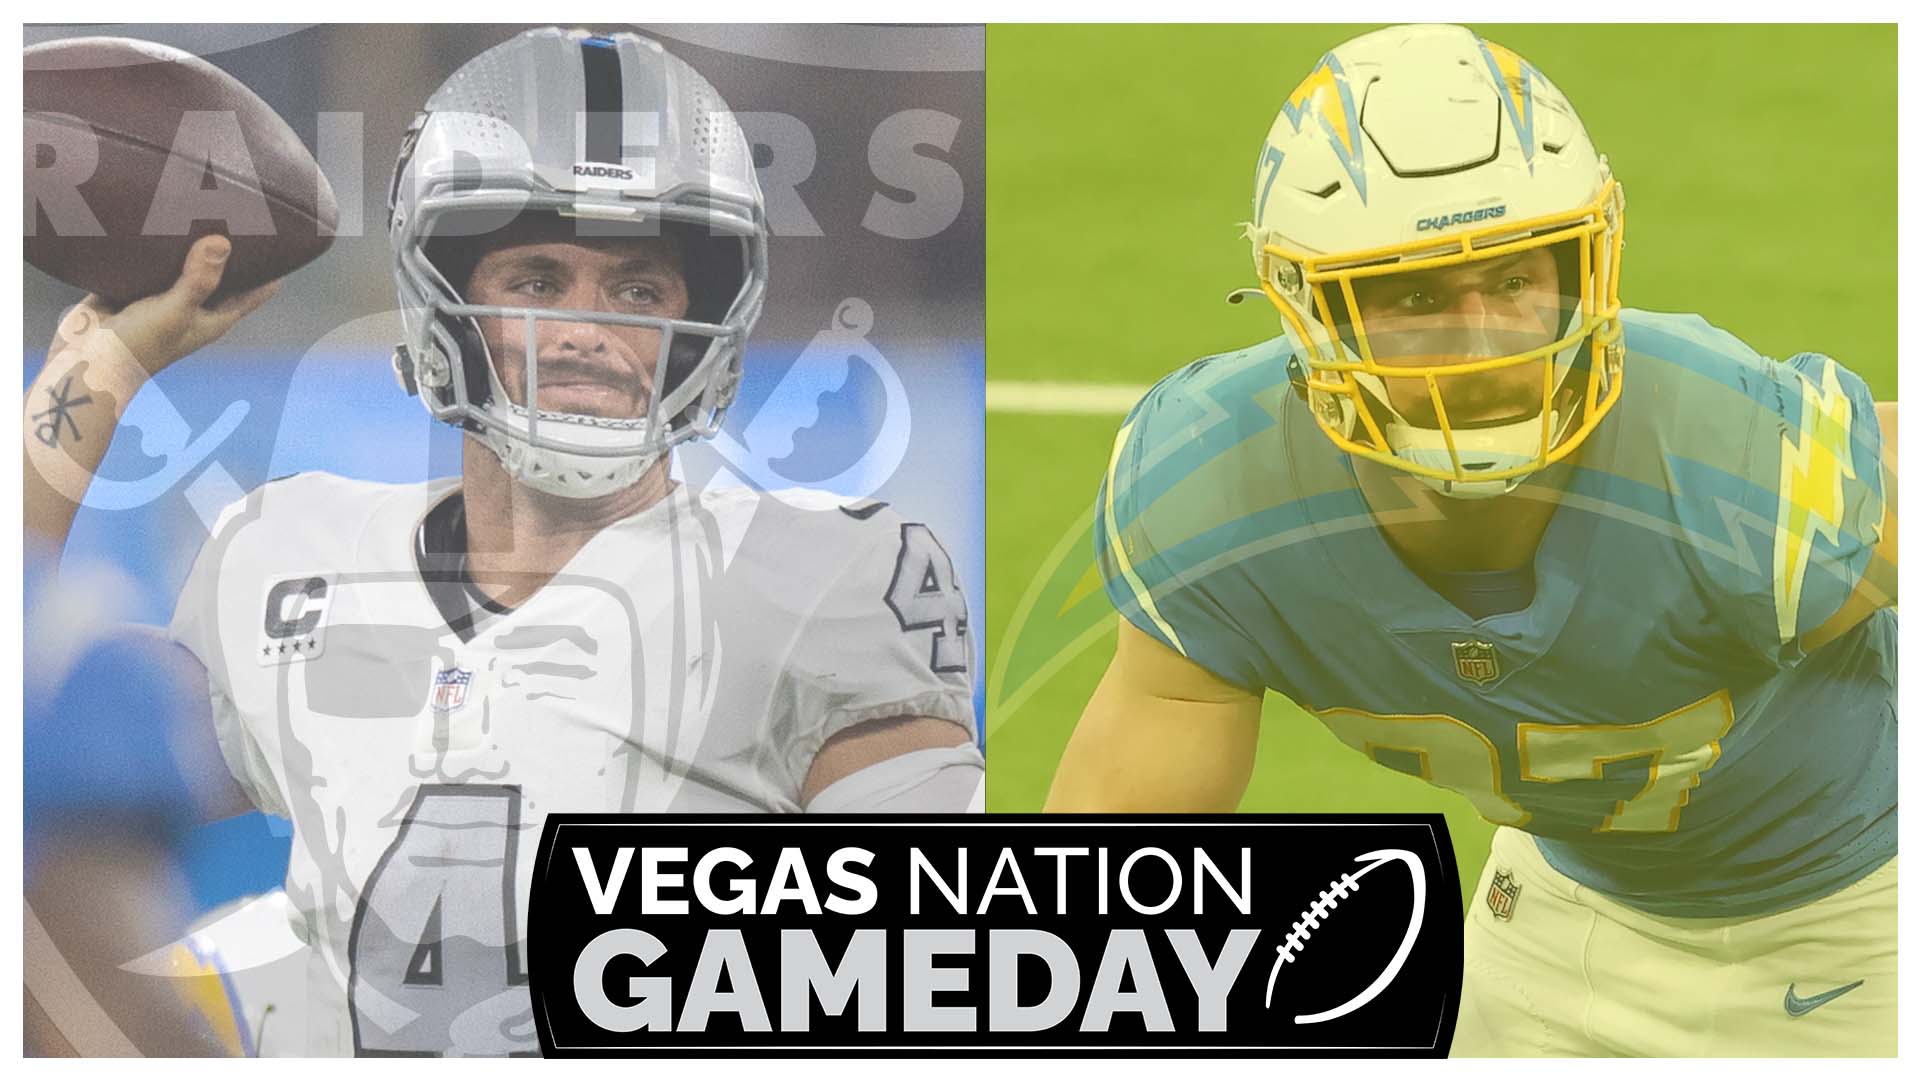 Raiders-Chargers, Winner Take All | Vegas Nation Gameday